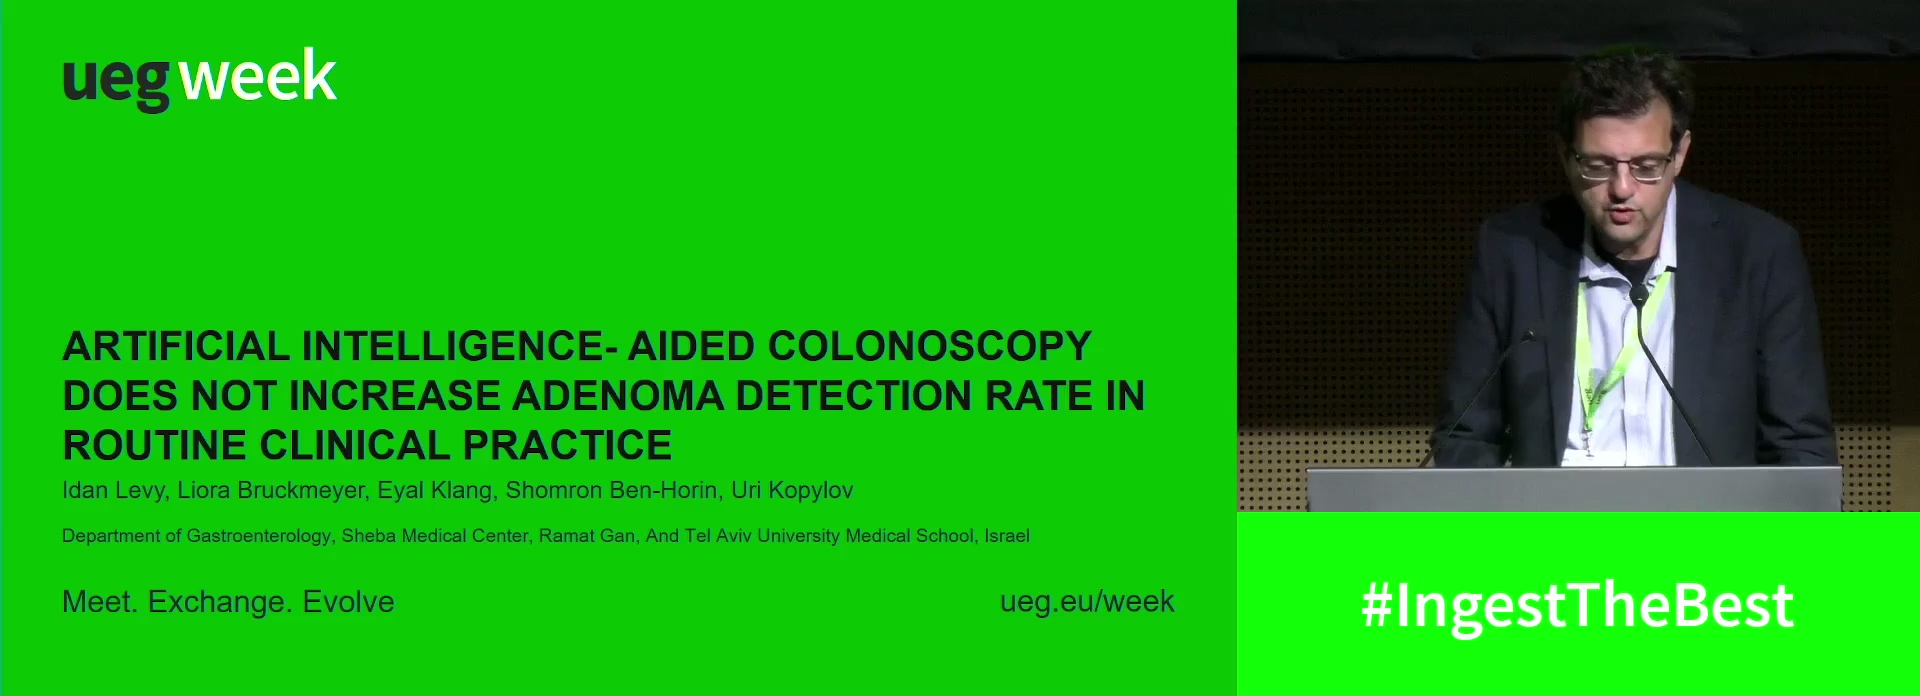 ARTIFICIAL INTELLIGENCE- AIDED COLONOSCOPY DOES NOT INCREASE ADENOMA DETECTION RATE IN ROUTINE CLINICAL PRACTICE